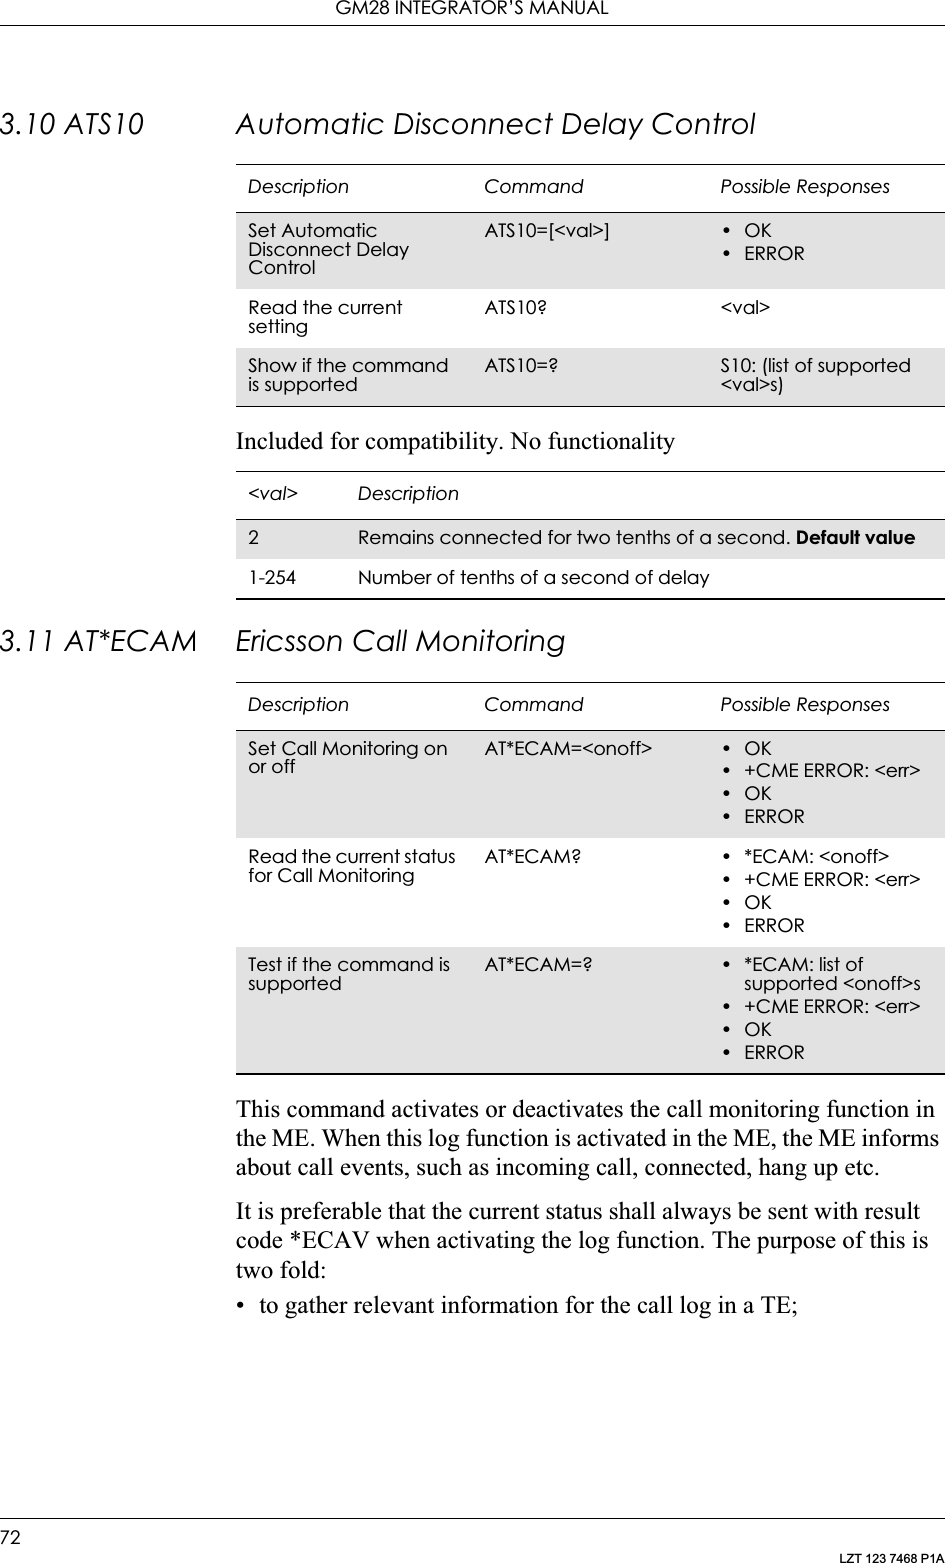 GM28 INTEGRATOR’S MANUAL72LZT 123 7468 P1A3.10 ATS10 Automatic Disconnect Delay ControlIncluded for compatibility. No functionality3.11 AT*ECAM Ericsson Call MonitoringThis command activates or deactivates the call monitoring function in the ME. When this log function is activated in the ME, the ME informs about call events, such as incoming call, connected, hang up etc.It is preferable that the current status shall always be sent with result code *ECAV when activating the log function. The purpose of this is two fold:• to gather relevant information for the call log in a TE;Description Command Possible ResponsesSet Automatic Disconnect Delay ControlATS10=[&lt;val&gt;] •OK•ERRORRead the current settingATS10? &lt;val&gt;Show if the command is supportedATS10=? S10: (list of supported &lt;val&gt;s)&lt;val&gt; Description2Remains connected for two tenths of a second. Default value1-254 Number of tenths of a second of delayDescription Command Possible ResponsesSet Call Monitoring on or offAT*ECAM=&lt;onoff&gt; •OK• +CME ERROR: &lt;err&gt;•OK•ERRORRead the current status for Call MonitoringAT*ECAM? • *ECAM: &lt;onoff&gt;• +CME ERROR: &lt;err&gt;•OK•ERRORTest if the command is supportedAT*ECAM=? • *ECAM: list of supported &lt;onoff&gt;s• +CME ERROR: &lt;err&gt;•OK•ERROR